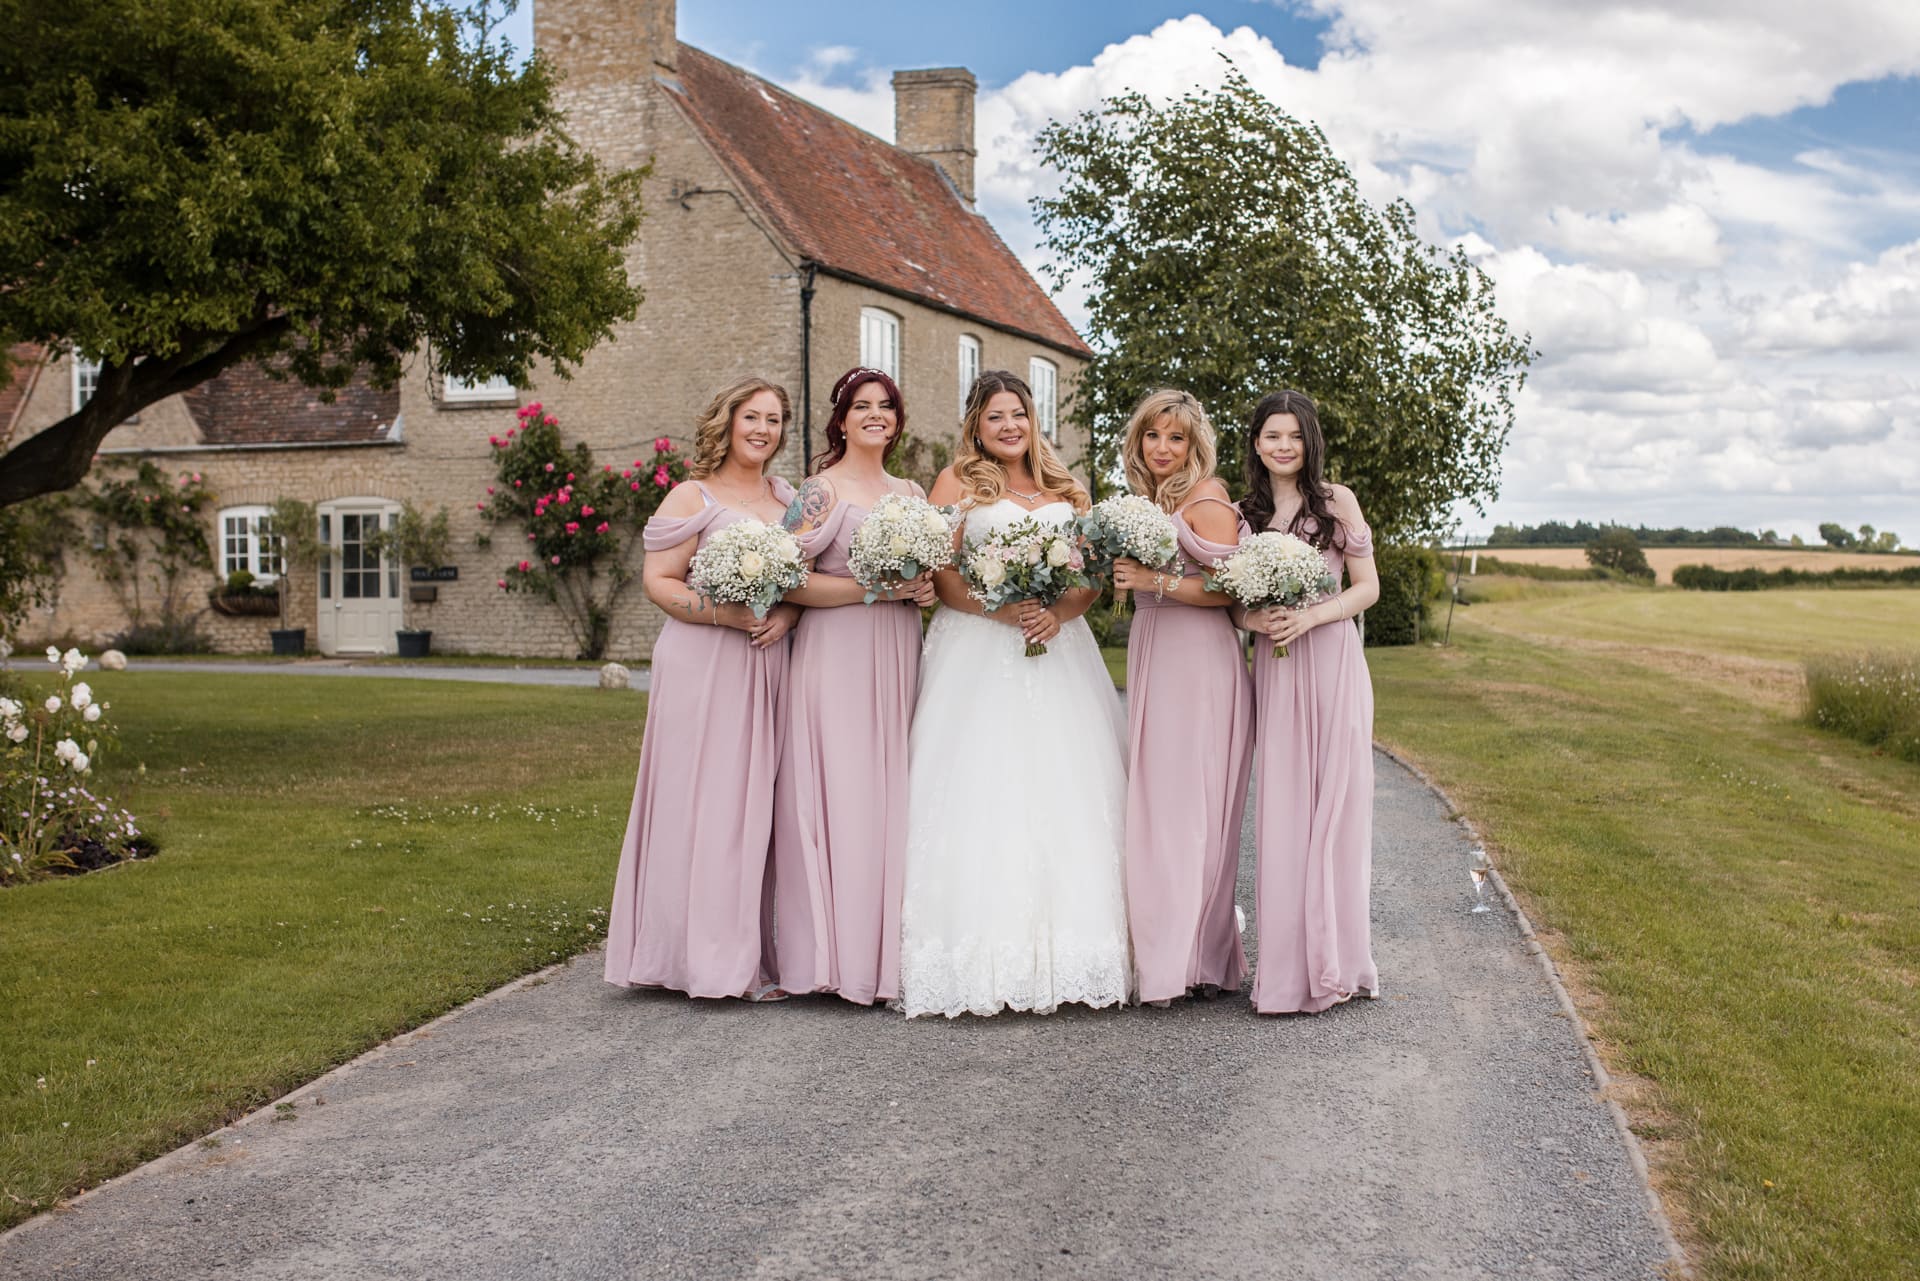 Bride and Bridesmaids with Farmhouse in the background